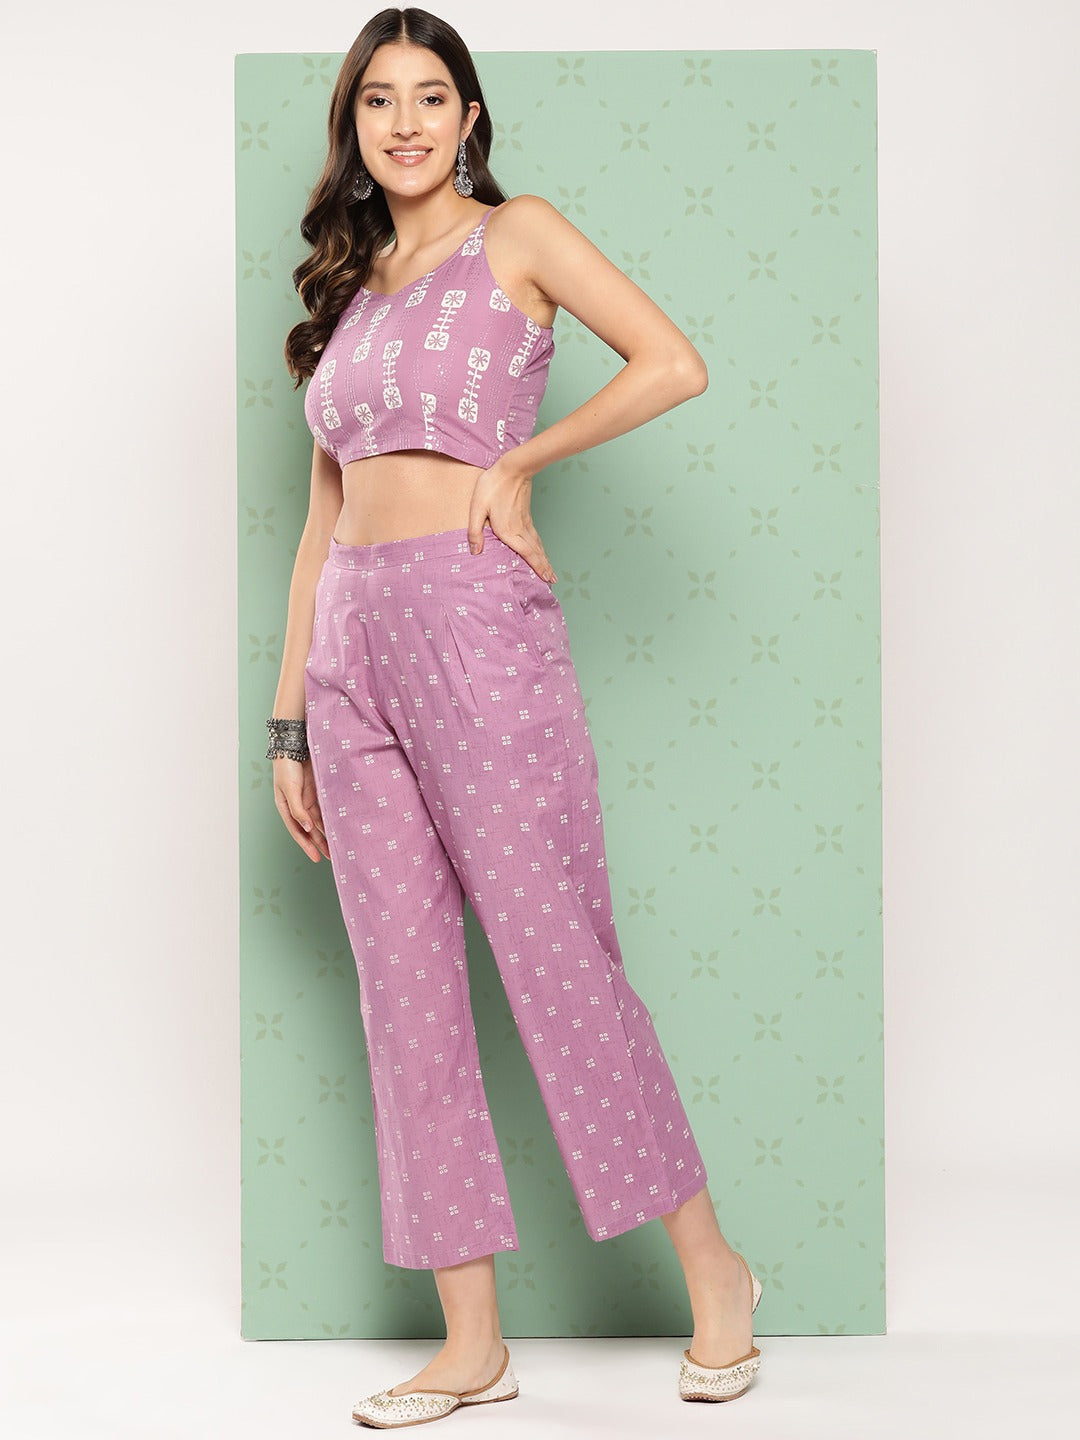 Purple Printed Cotton Top with Trousers with Shrug-Yufta Store-1520CRDPRS